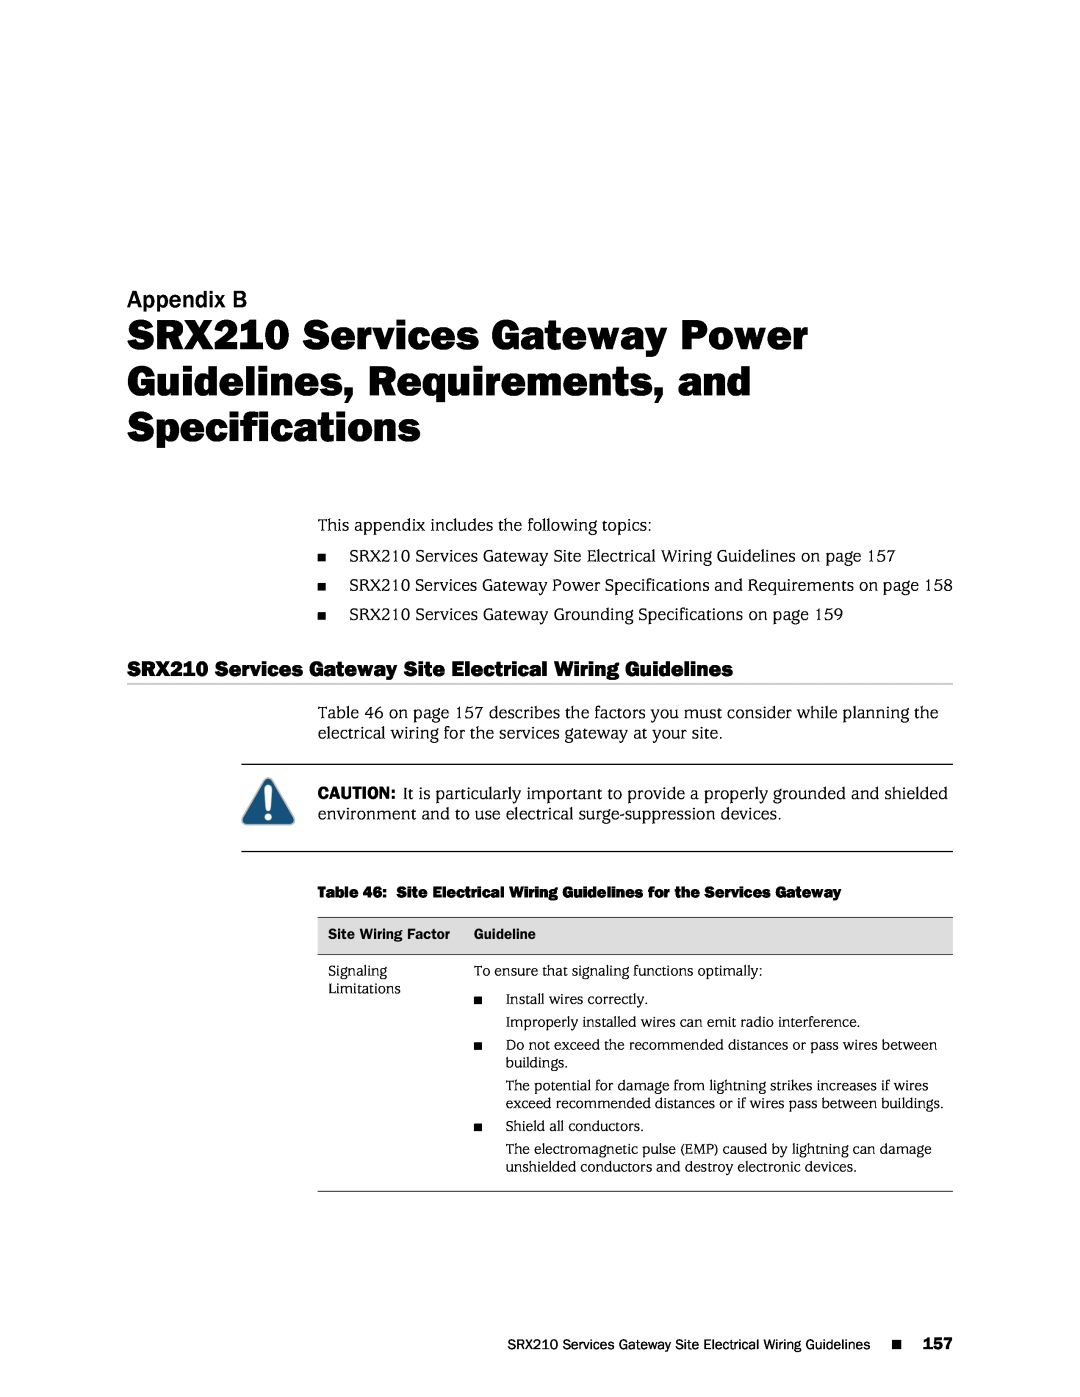 Juniper Networks SRX 210 manual SRX210 Services Gateway Power Guidelines, Requirements, and, Specifications, Appendix B 